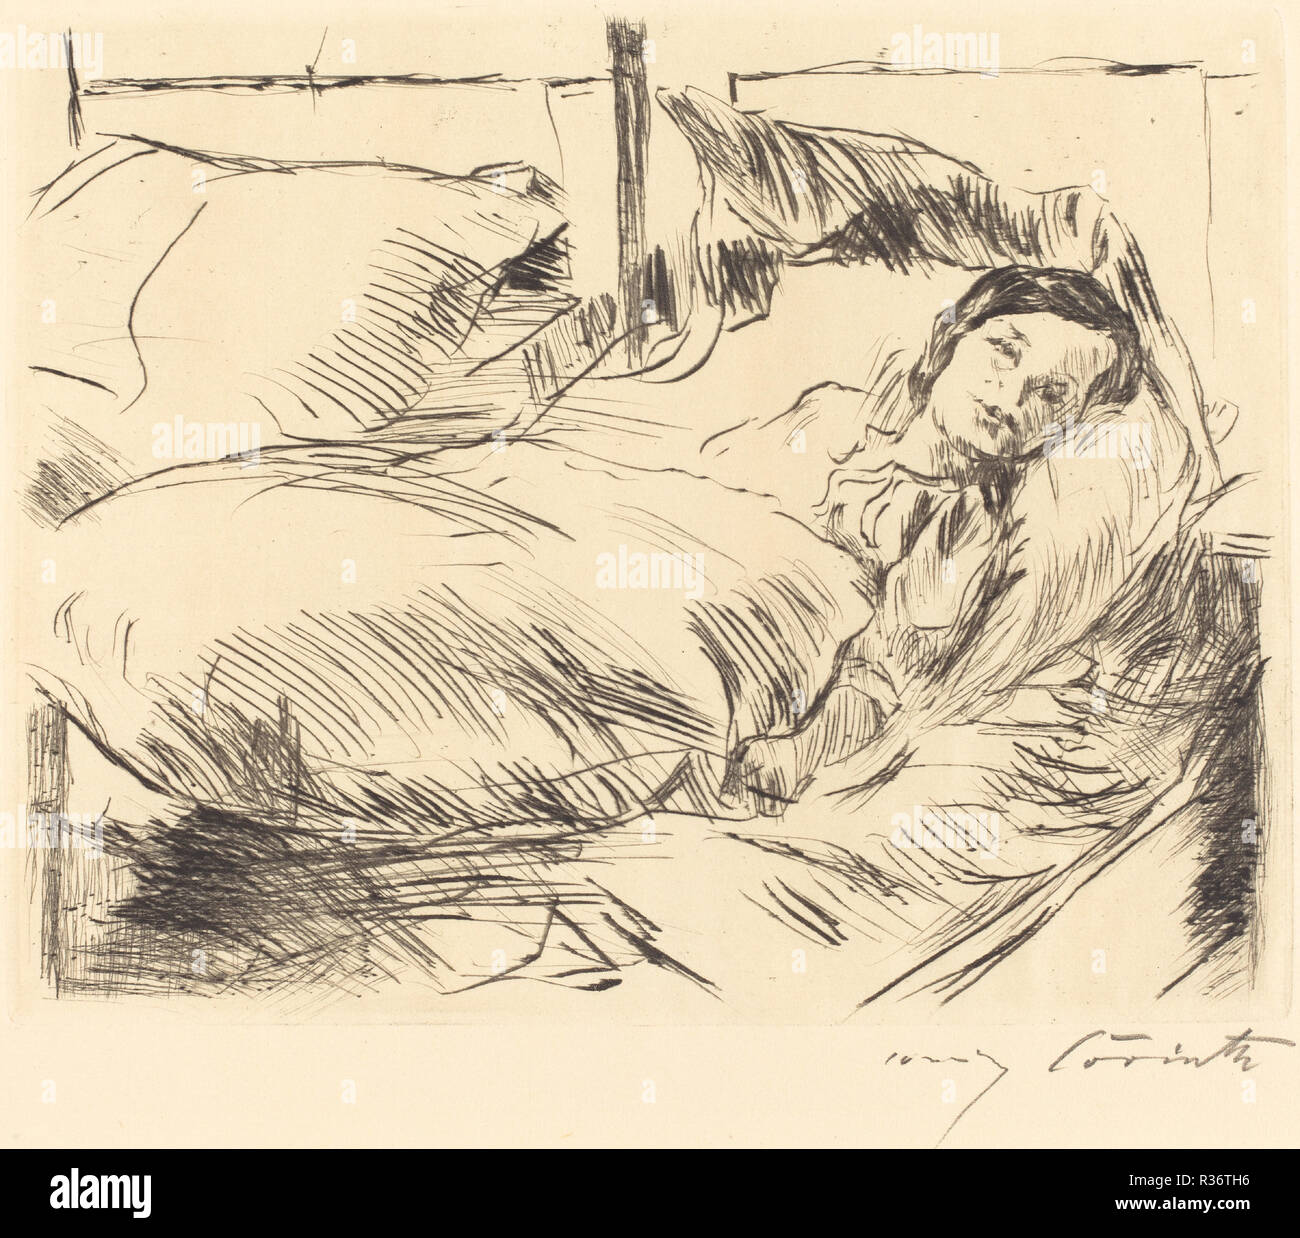 The Sick Child (Das Kranke Kind). Dated: 1918. Dimensions: plate: 19 x 24.1 cm (7 1/2 x 9 1/2 in.)  sheet: 28.4 x 30.3 cm (11 3/16 x 11 15/16 in.). Medium: drypoint in black on laid paper. Museum: National Gallery of Art, Washington DC. Author: Lovis Corinth. Stock Photo